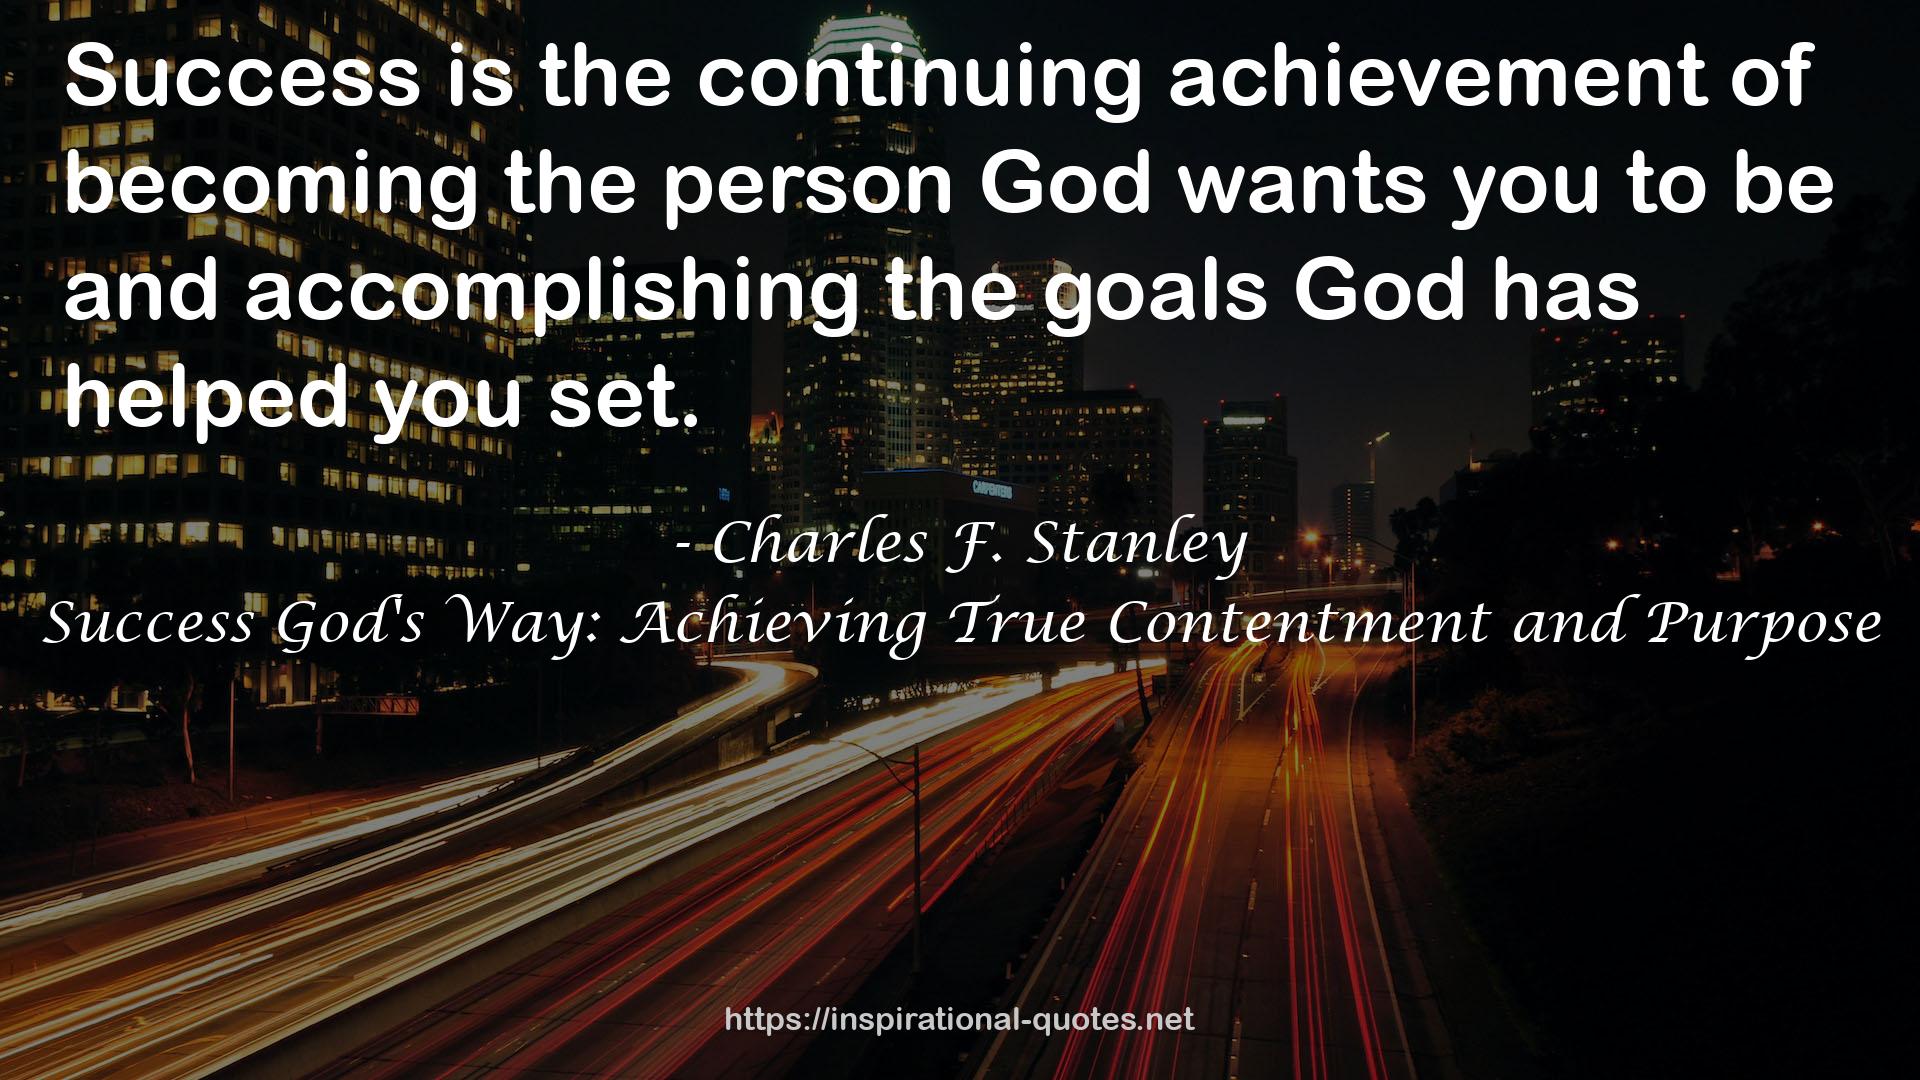 Success God's Way: Achieving True Contentment and Purpose QUOTES